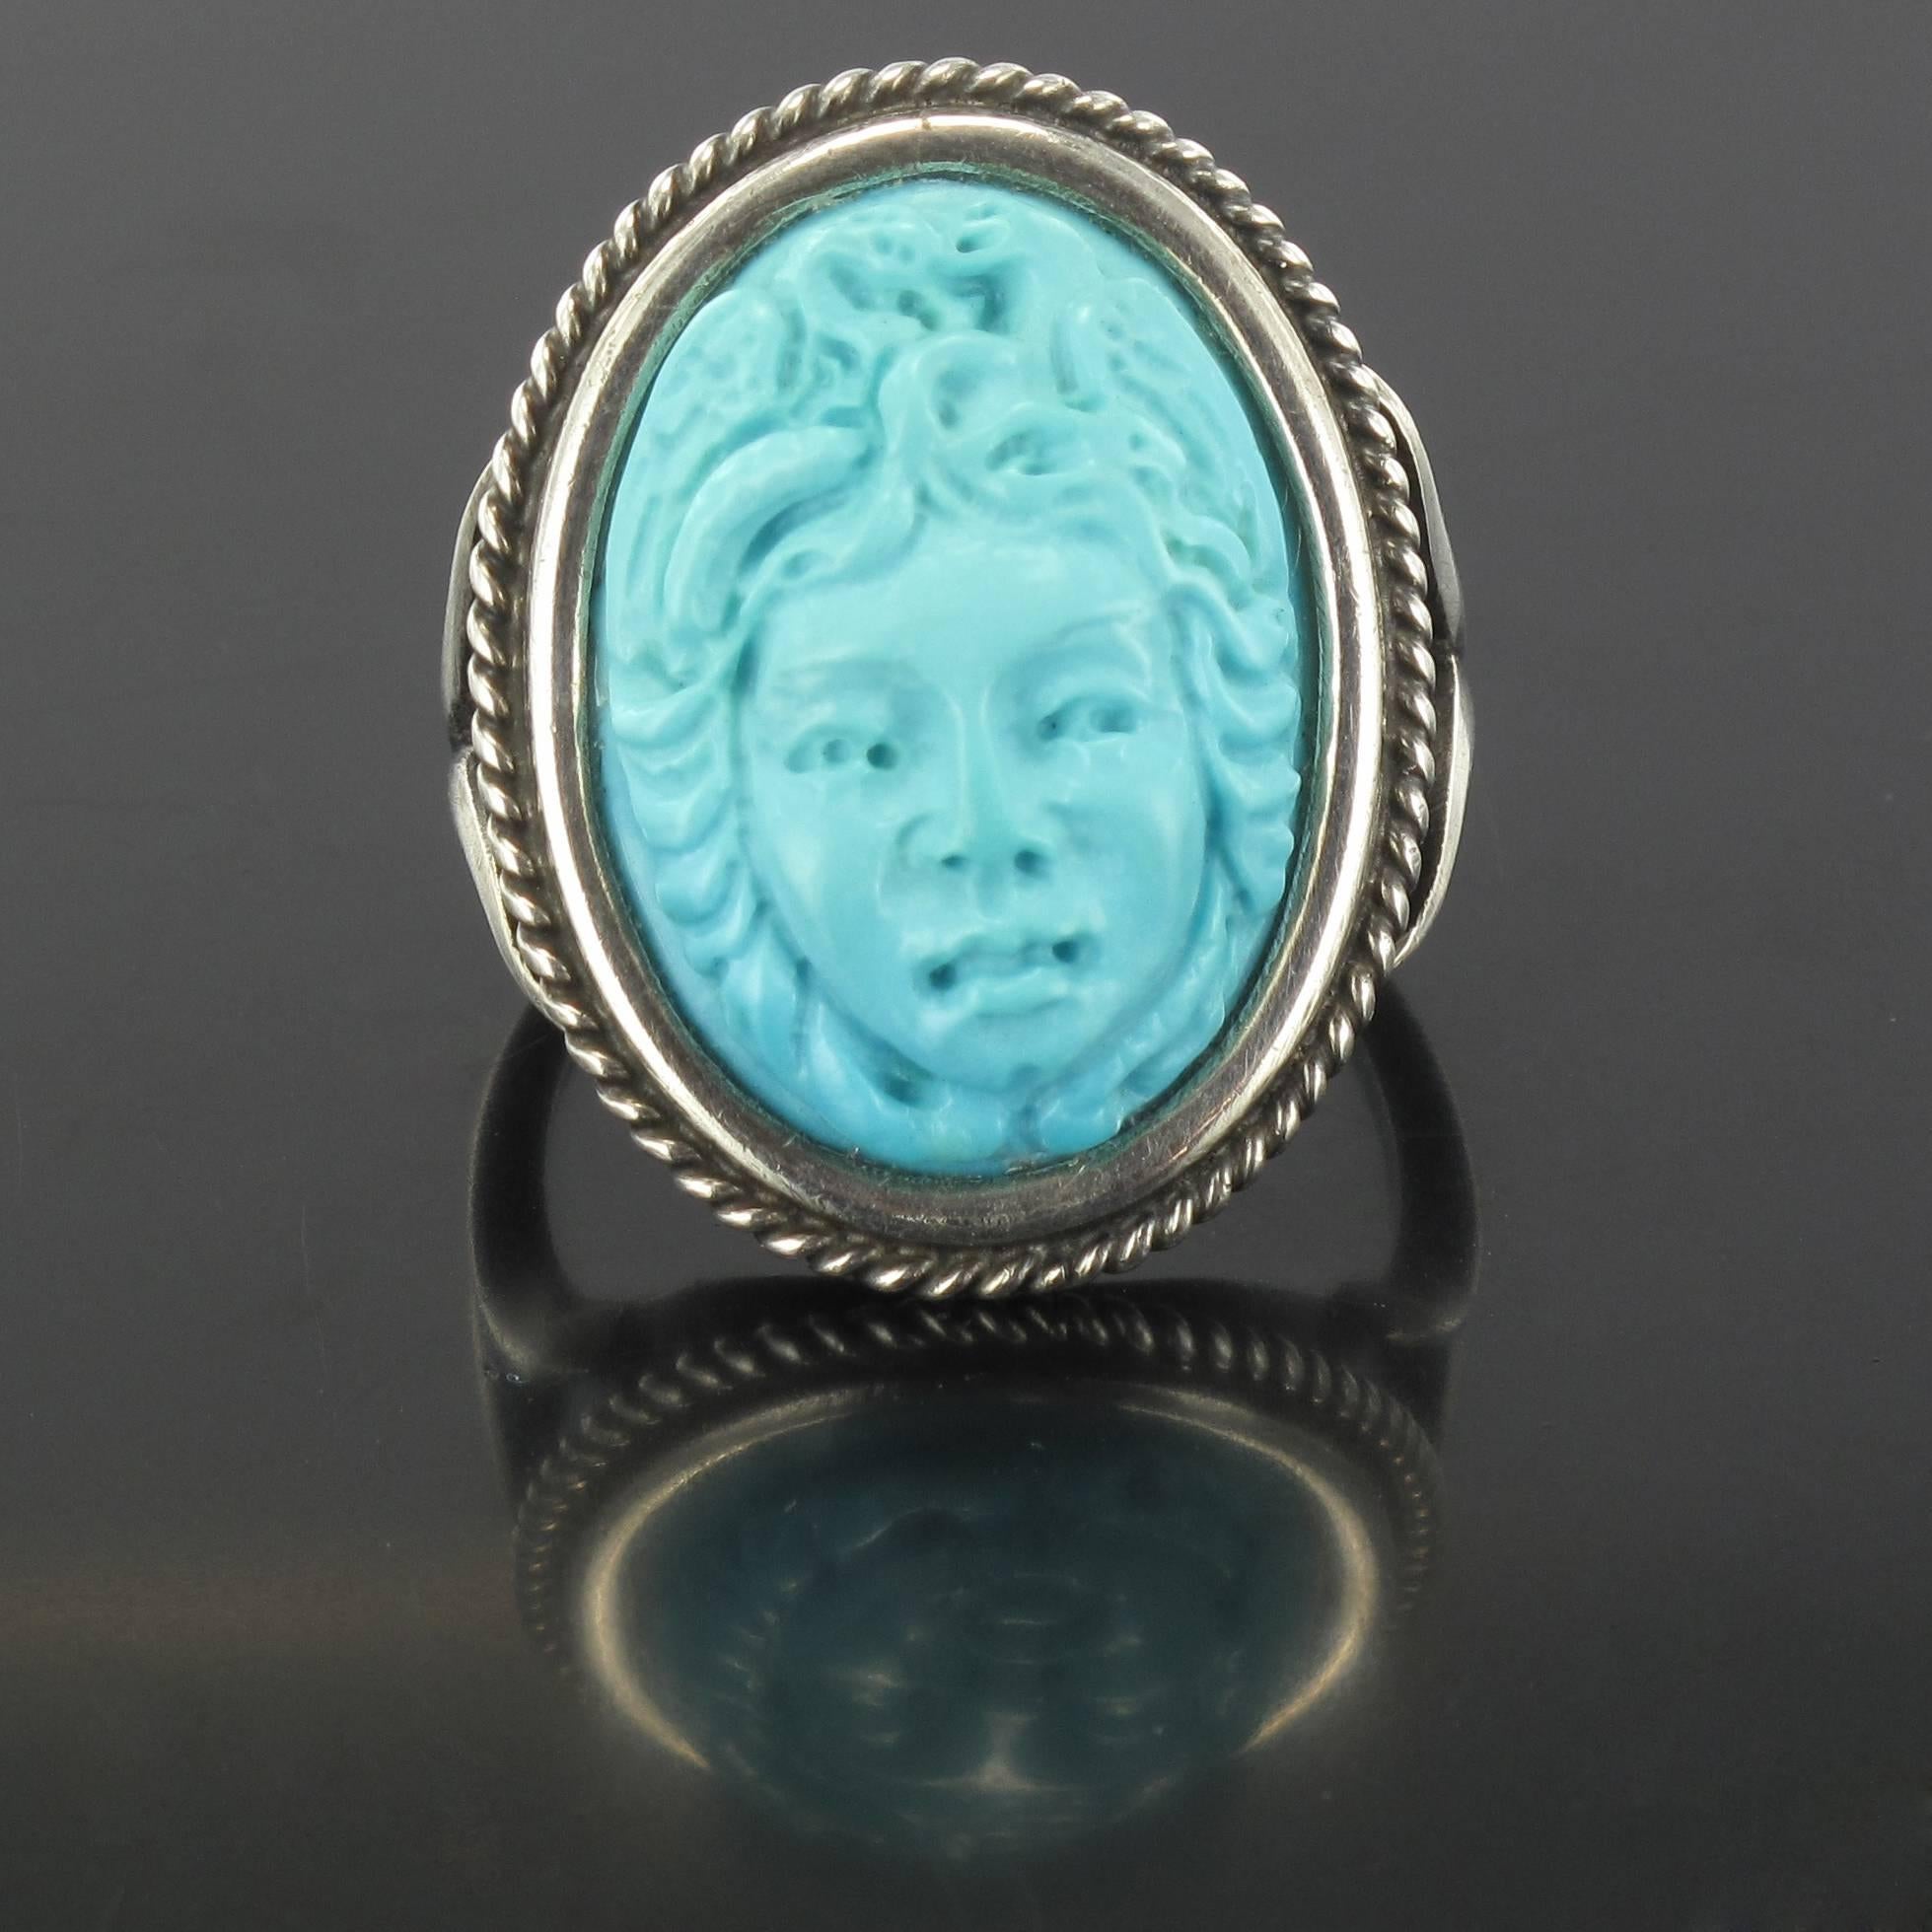 Silver Ring.

This splendid antique silver ring is bezel set with a turquoise cameo of Medusa. The entire edging of the ring mount is set with a fine silver cord. 

Height: 2.6 cm, width: 2 cm, the ring base width: 1.8 mm.
Total weight: about